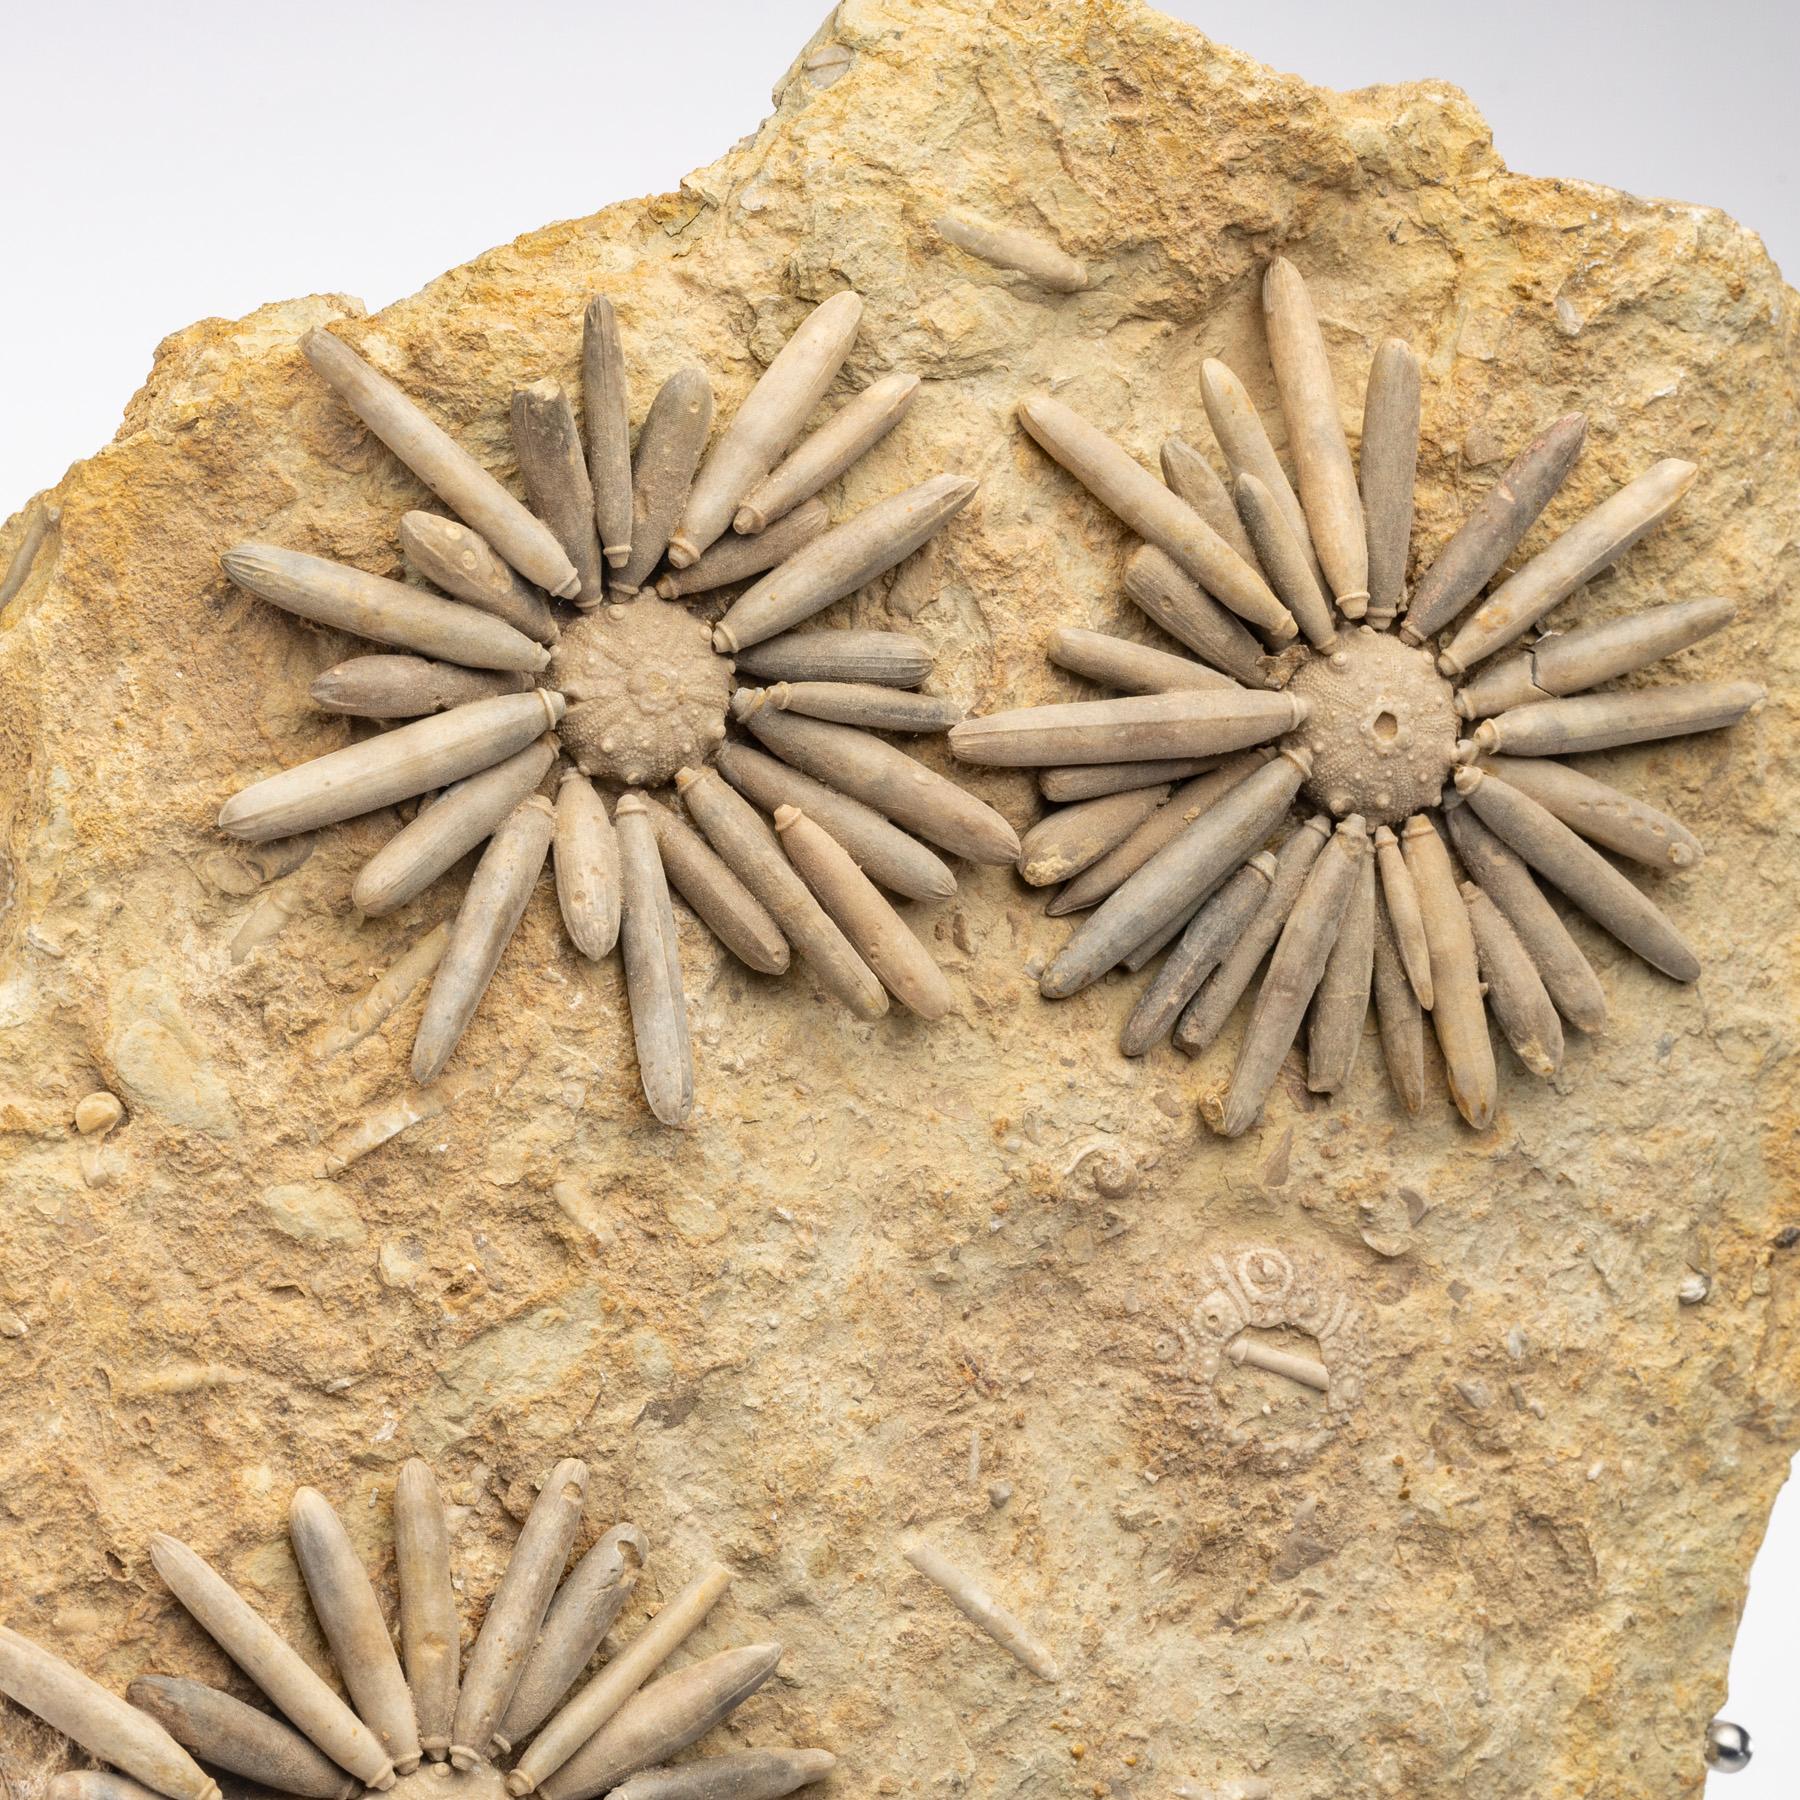 Organic Modern Fossil Sea Urchin from Morocco, Early Jurassic '170 Million Years Old'